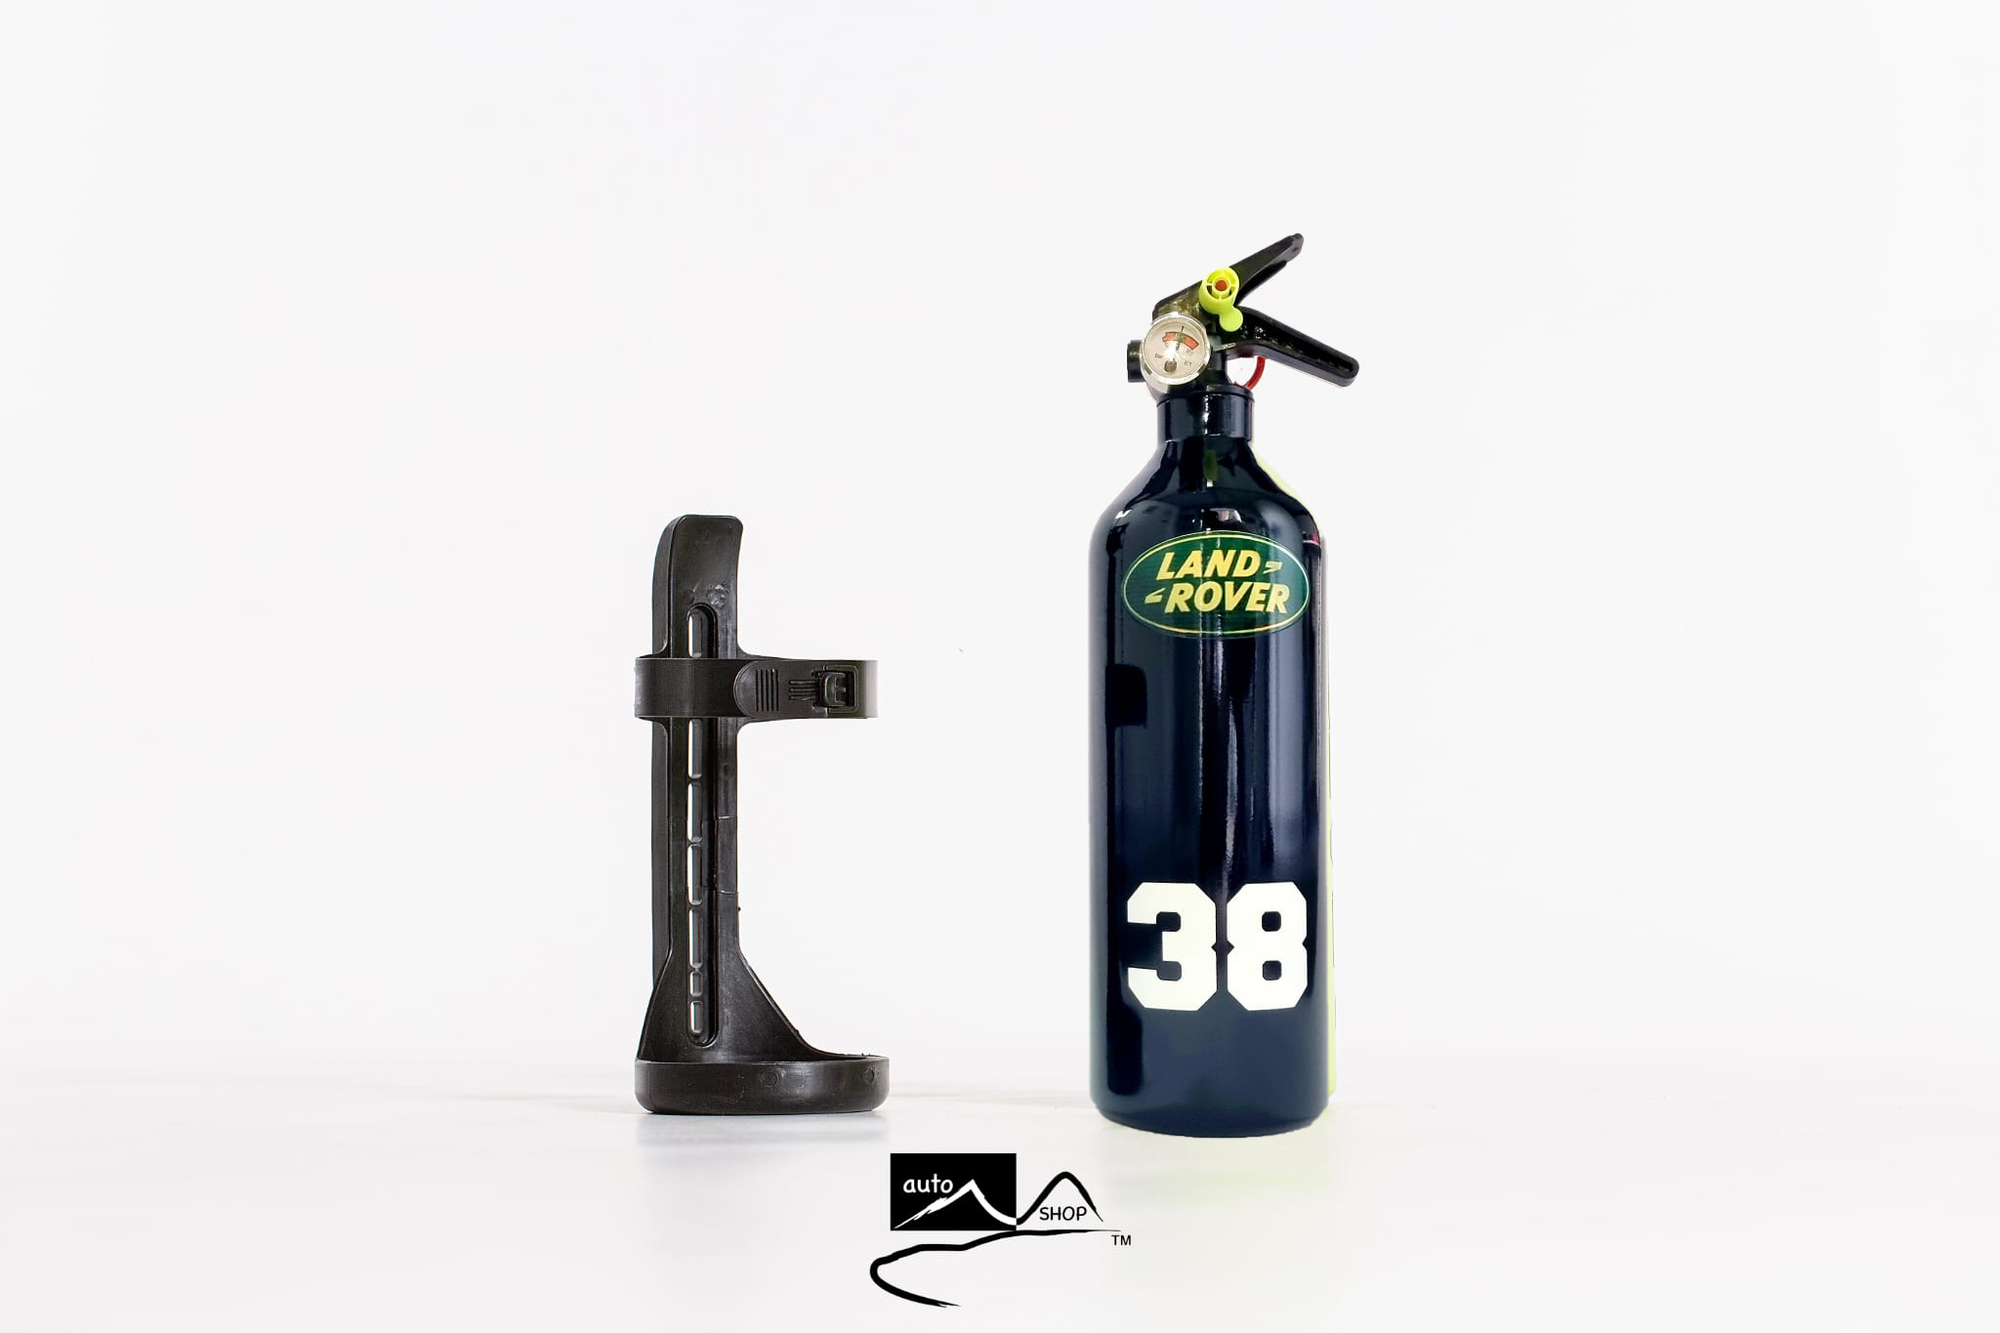 LAND ROVER™ fire extinguisher